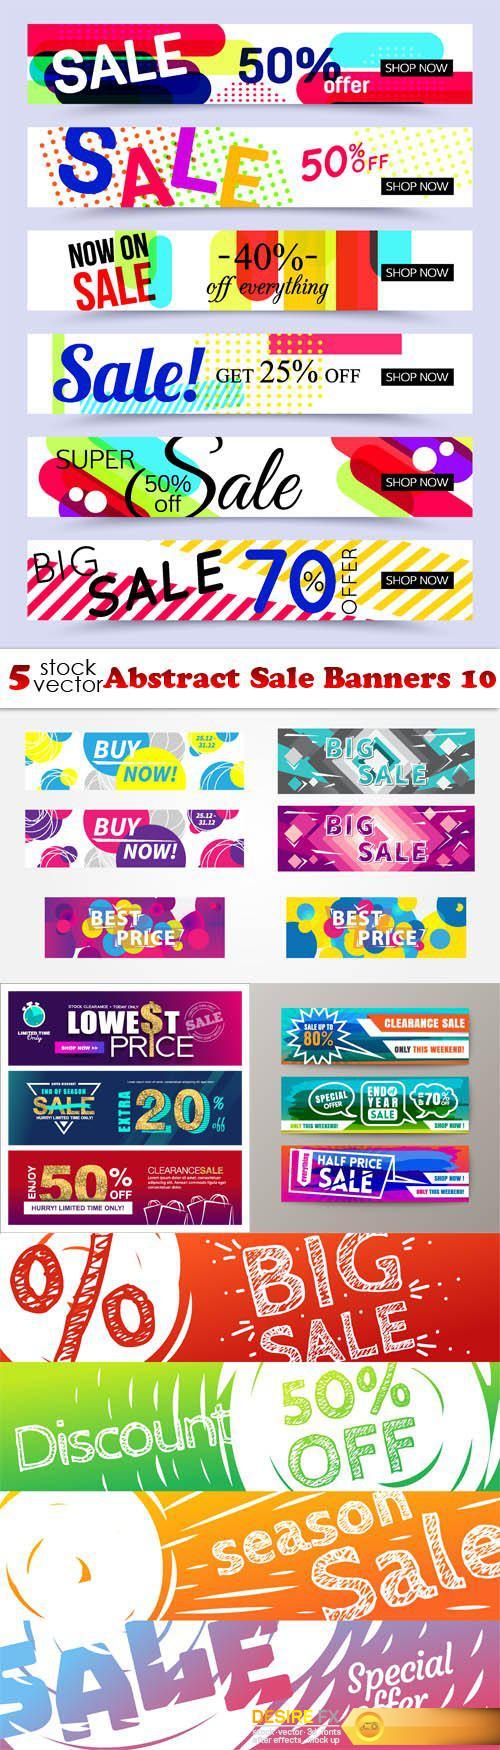 Vectors - Abstract Sale Banners 10